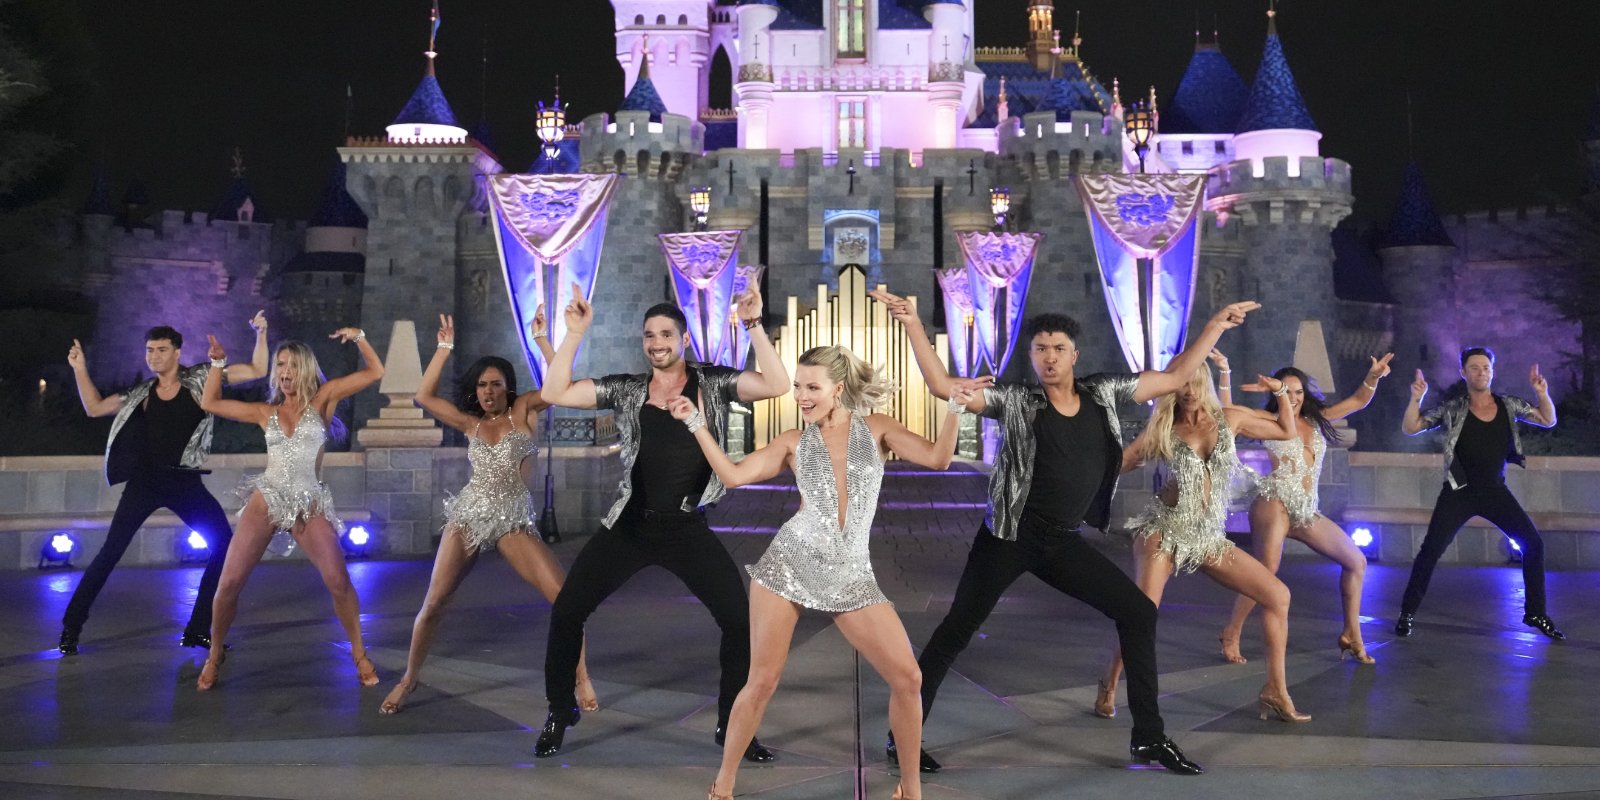 'Dancing with the Stars' pros dance outside of Snow White's castle in Disneyland, California.